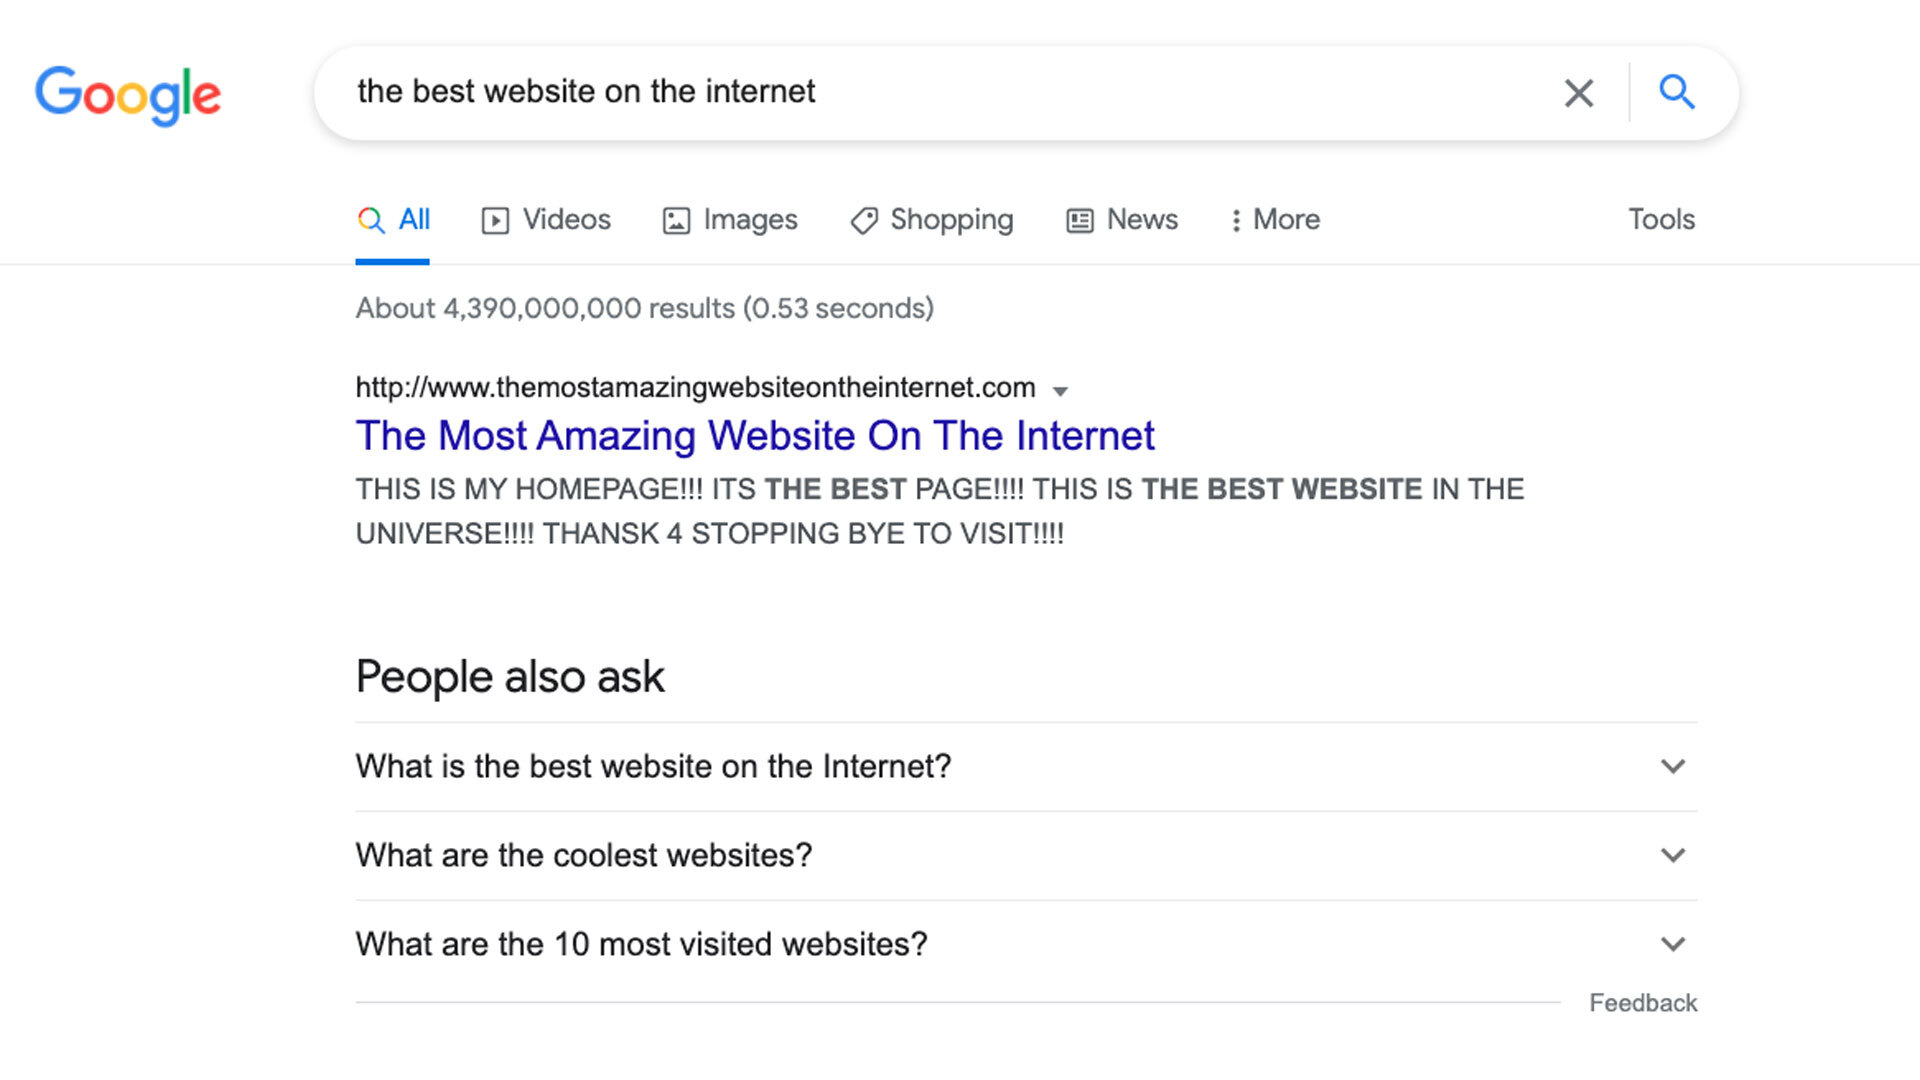 Google search image for the best website on the internet, the top result is titled "The Most Amazing Website on the Internet"